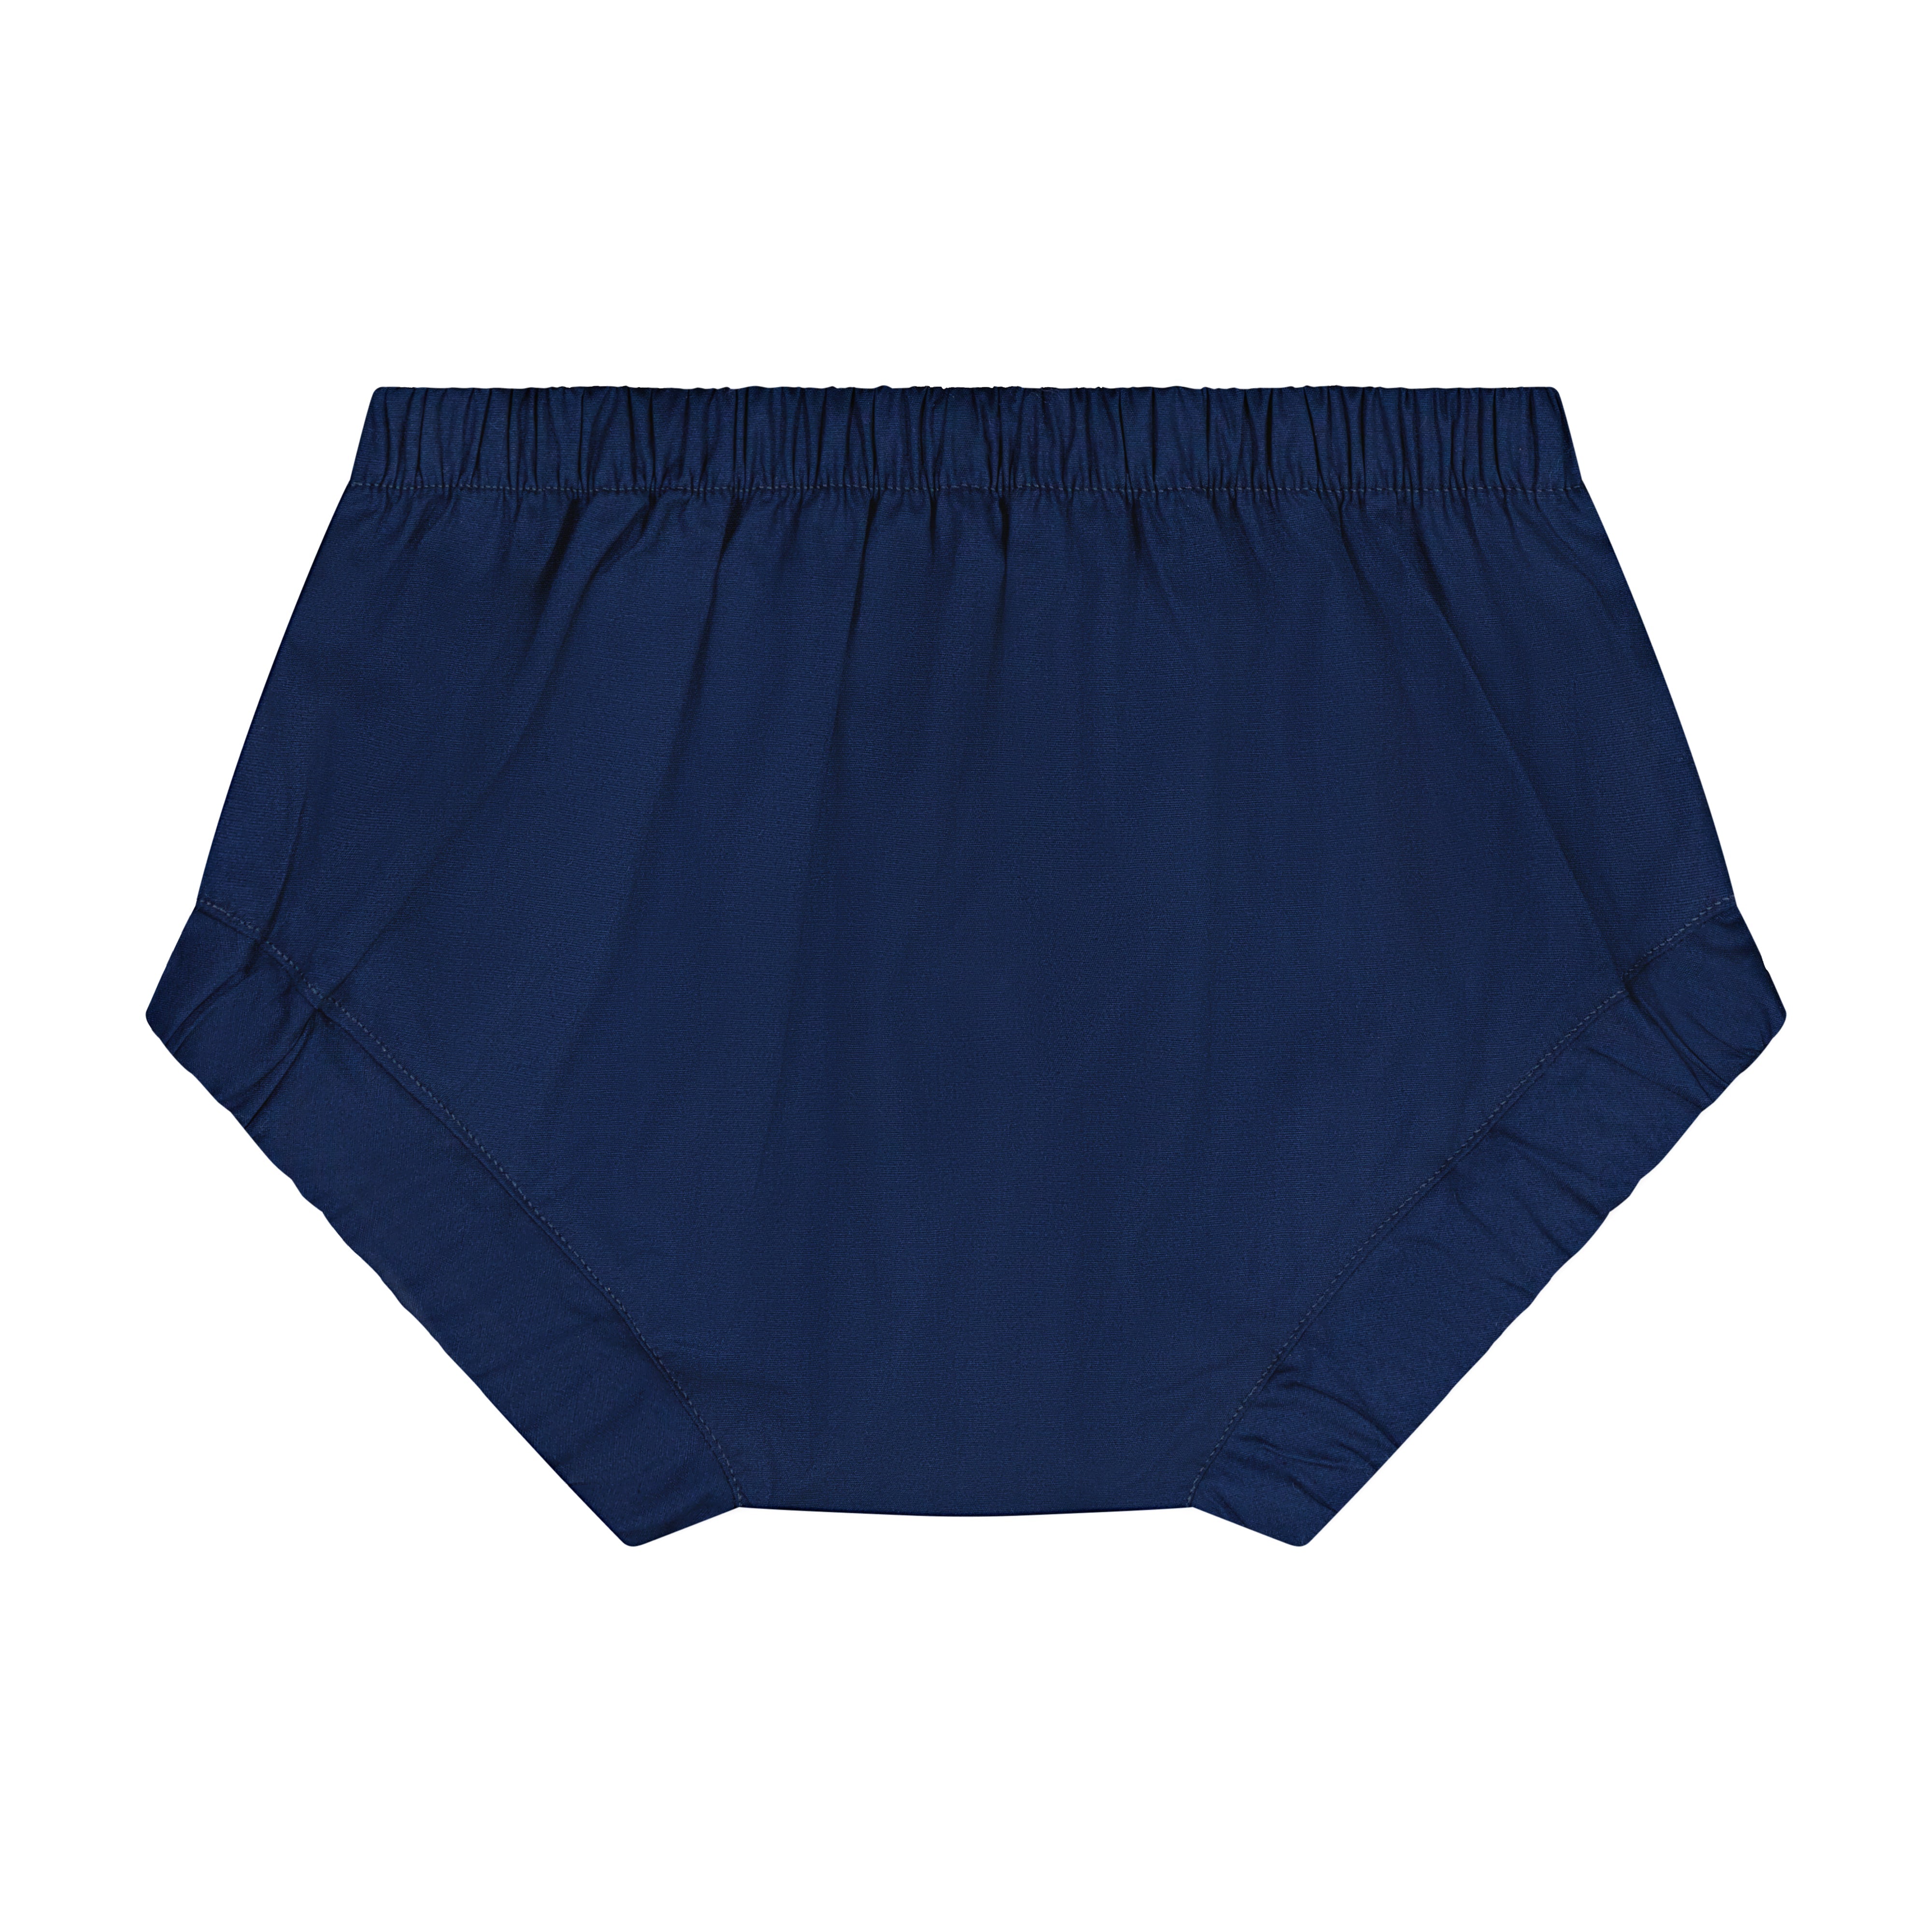 Organic Bloomers - Solid Navy